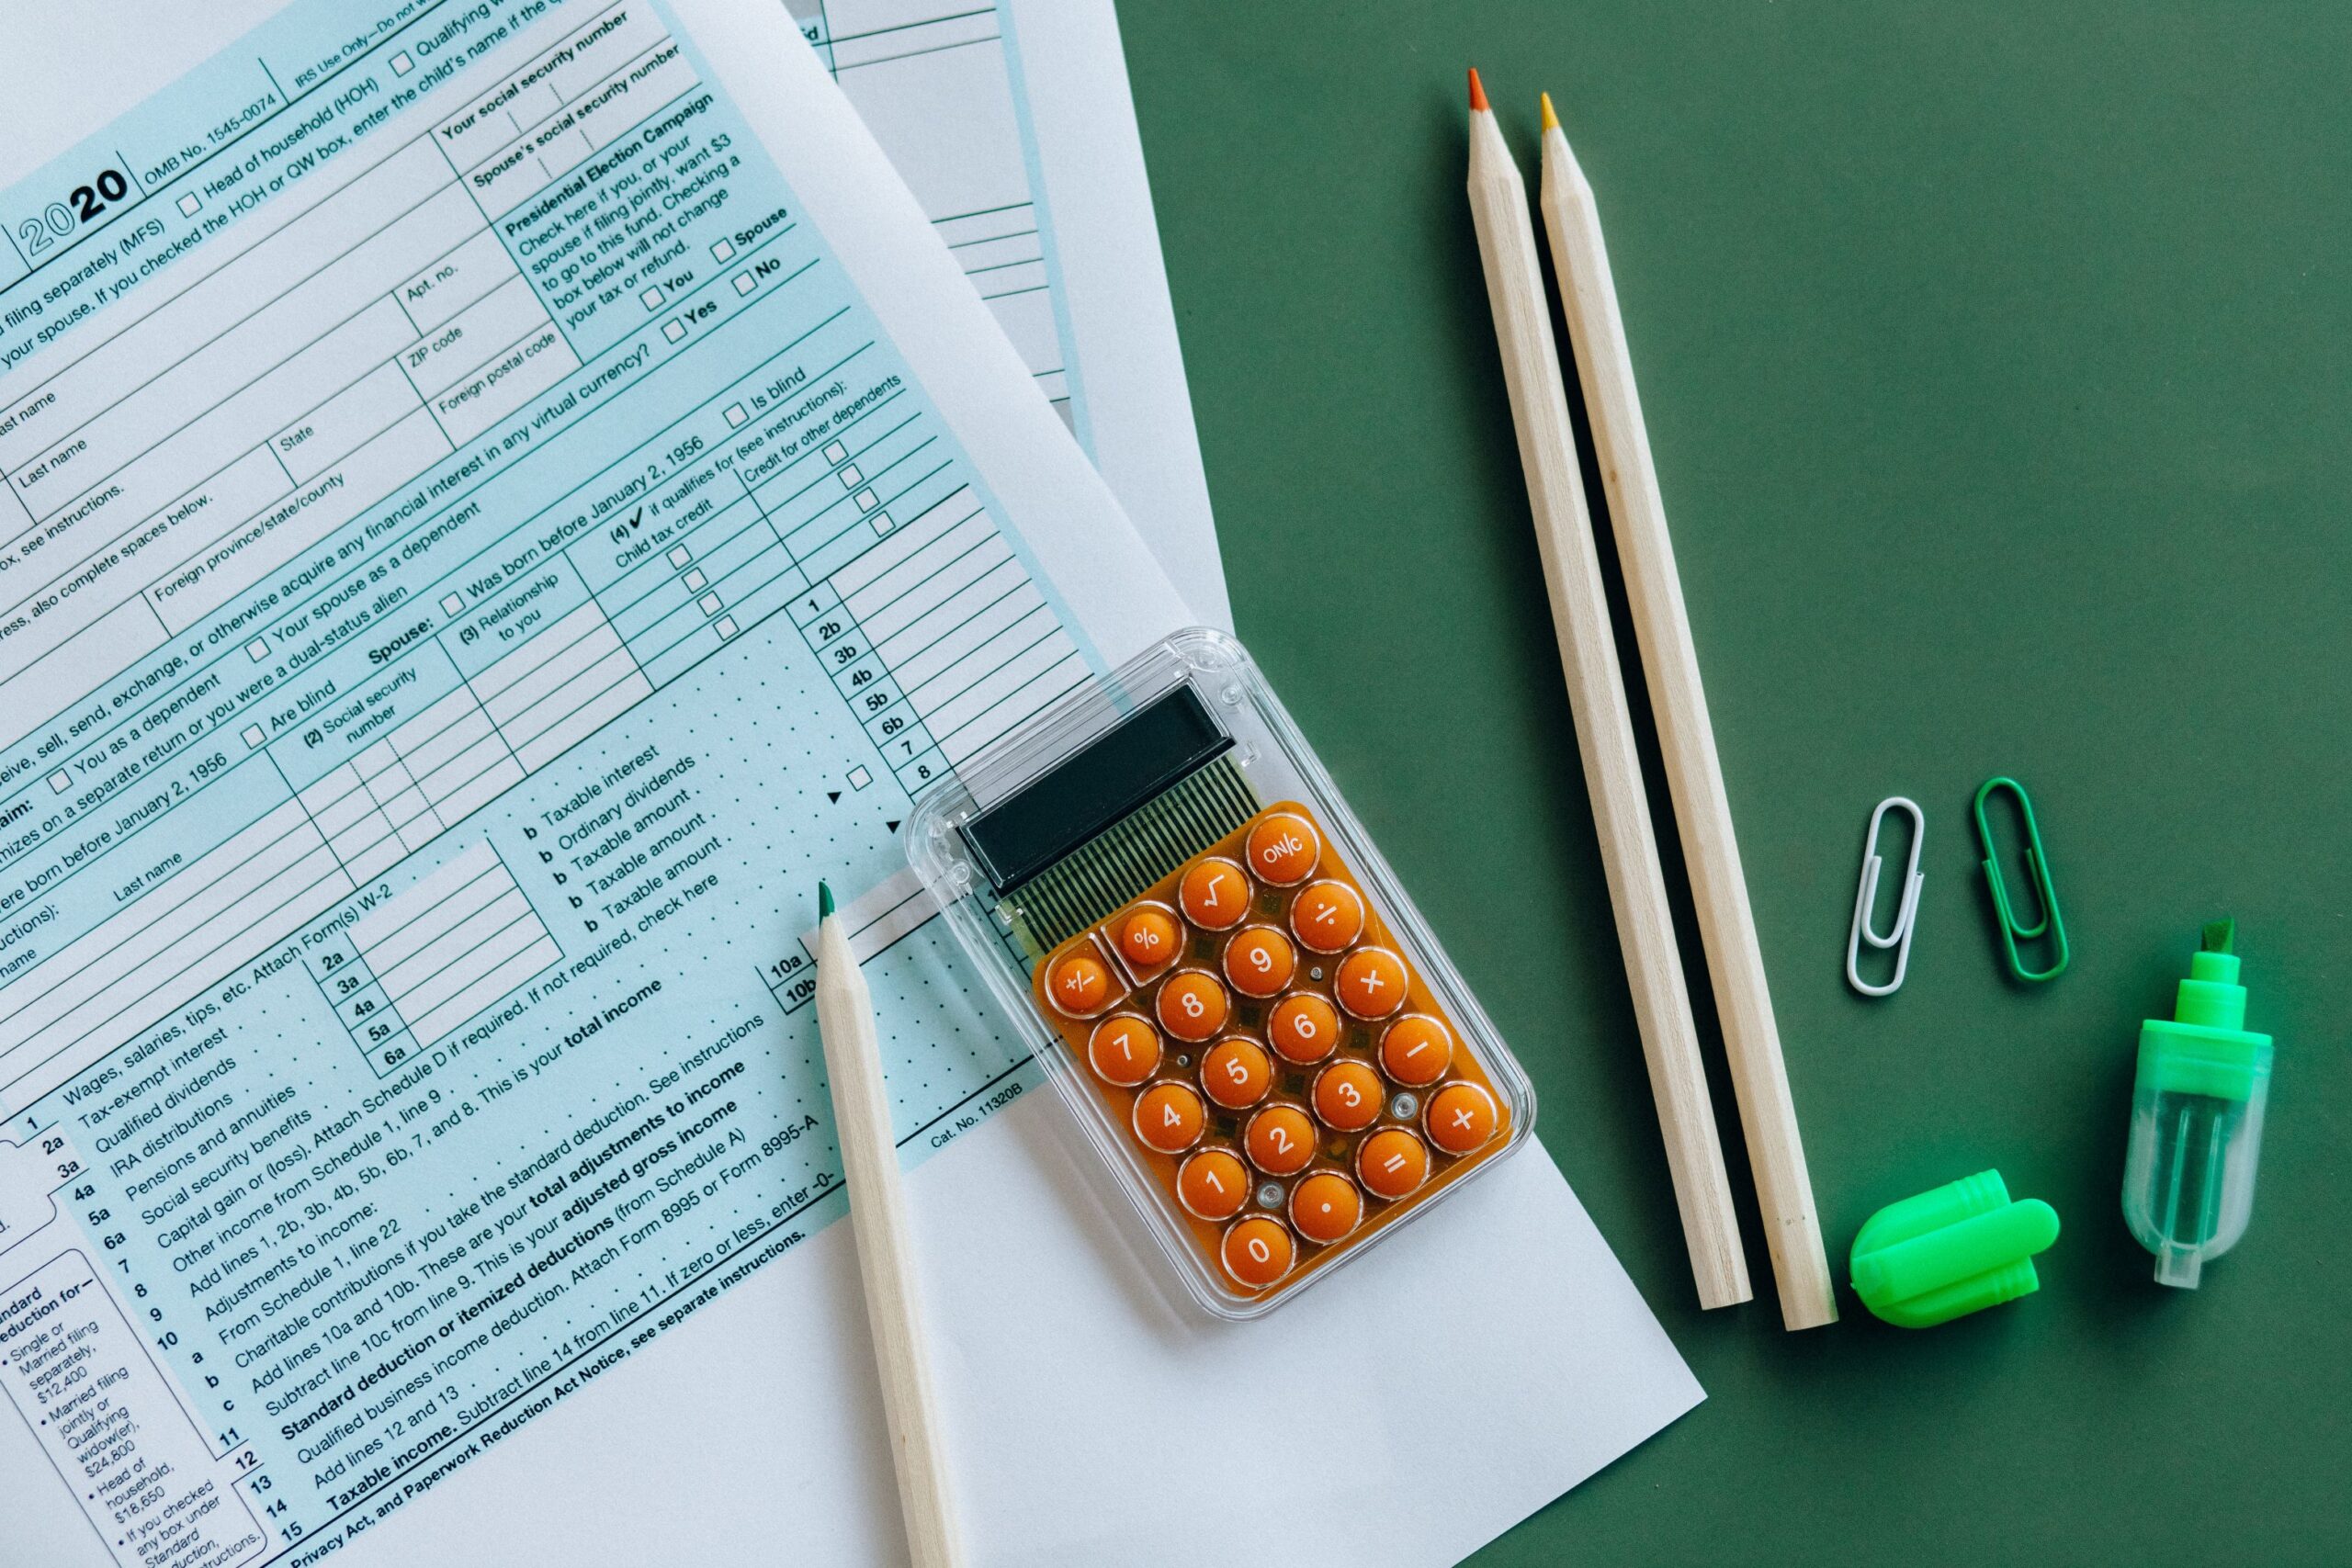 Photo of printed tax form on dark green surface. A handheld calculator with orange buttons, three wooden pencils, two paperclips, and a green highlighter are postioned on and beside the tax form. Photo by Nataliya Vaitkevich on Pexels.